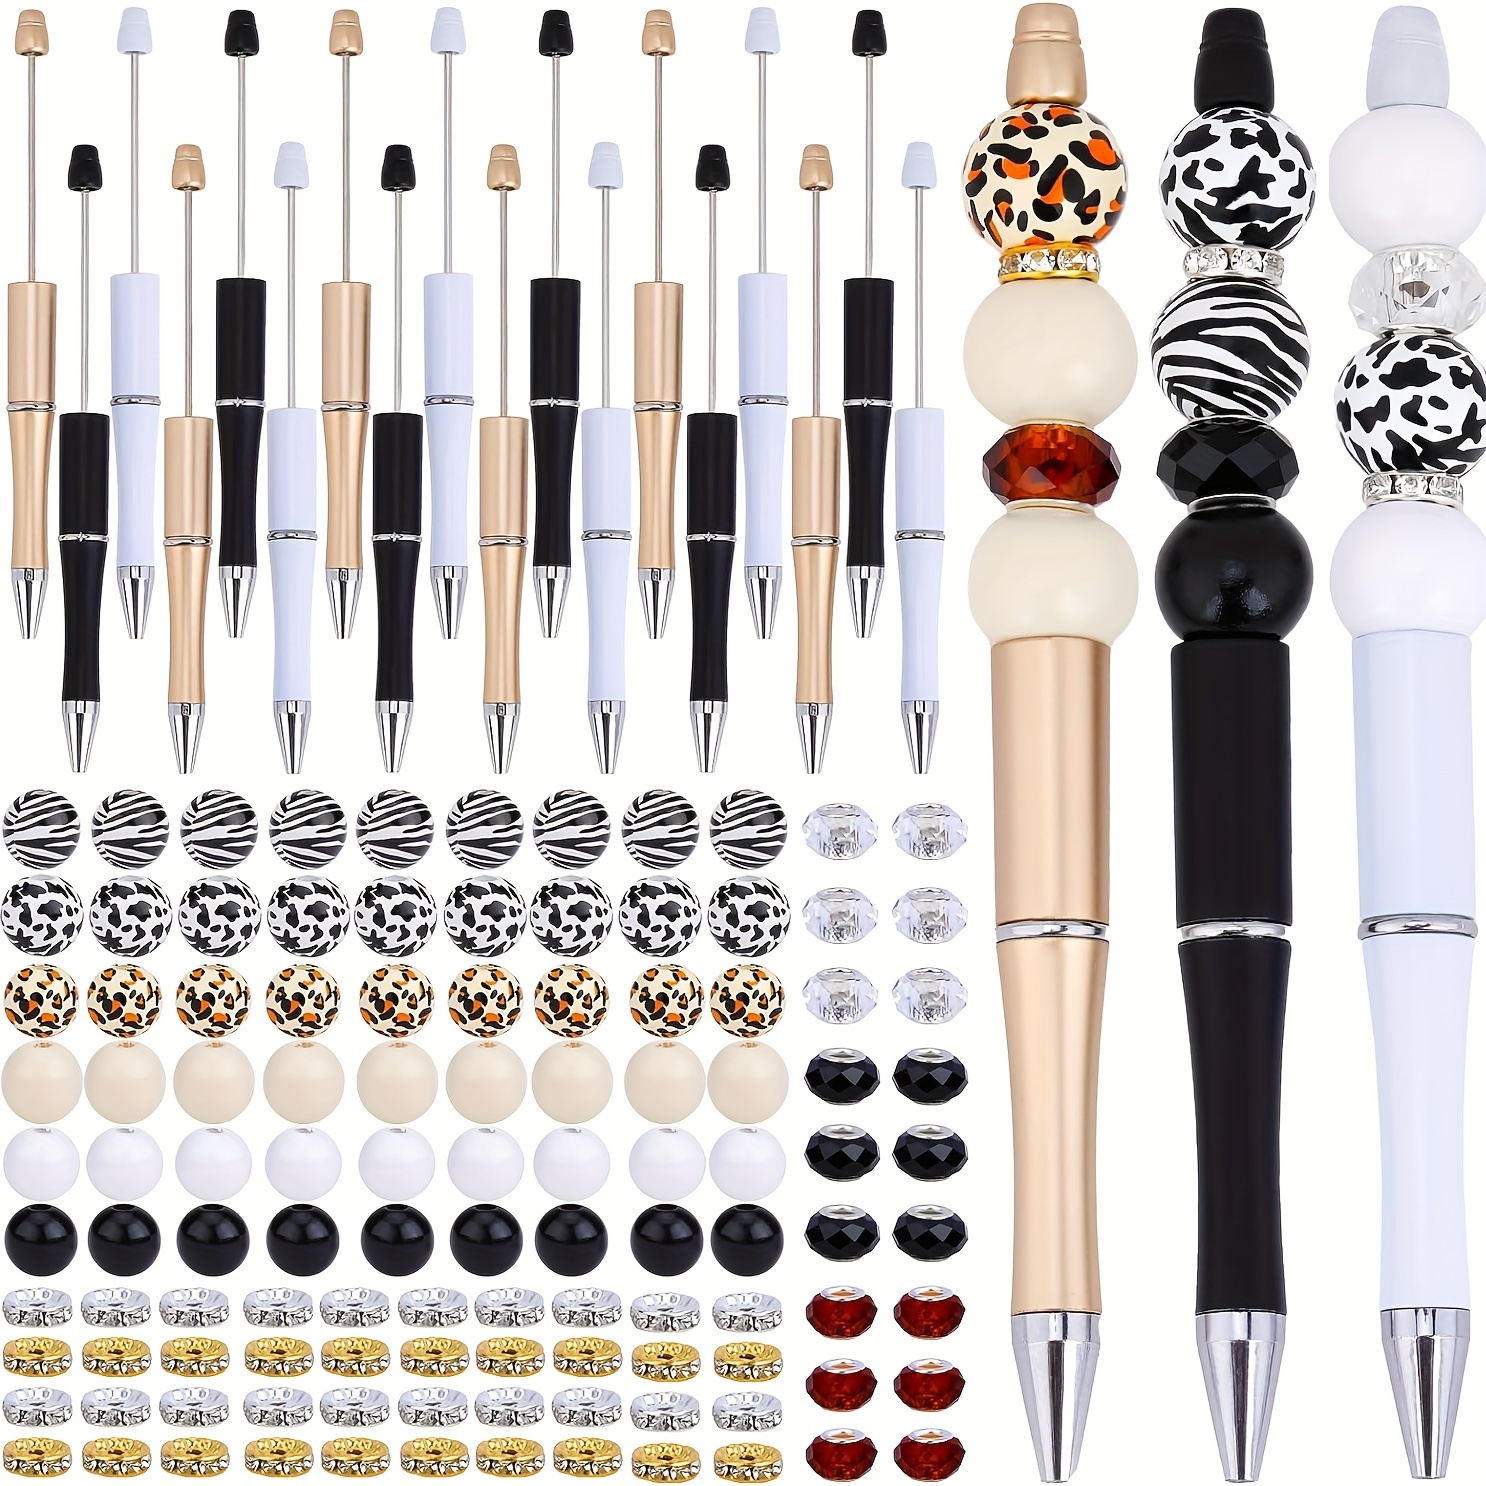 

78-piece Beadable Pen Kit, Diy Jewelry-making Set With 9 Pens, 30 Wood Beads, 15 Large-hole Beads, 24 Spacer Beads, Craft Supplies For Office And School, Beaded Pens With Black Ink, No Power Needed